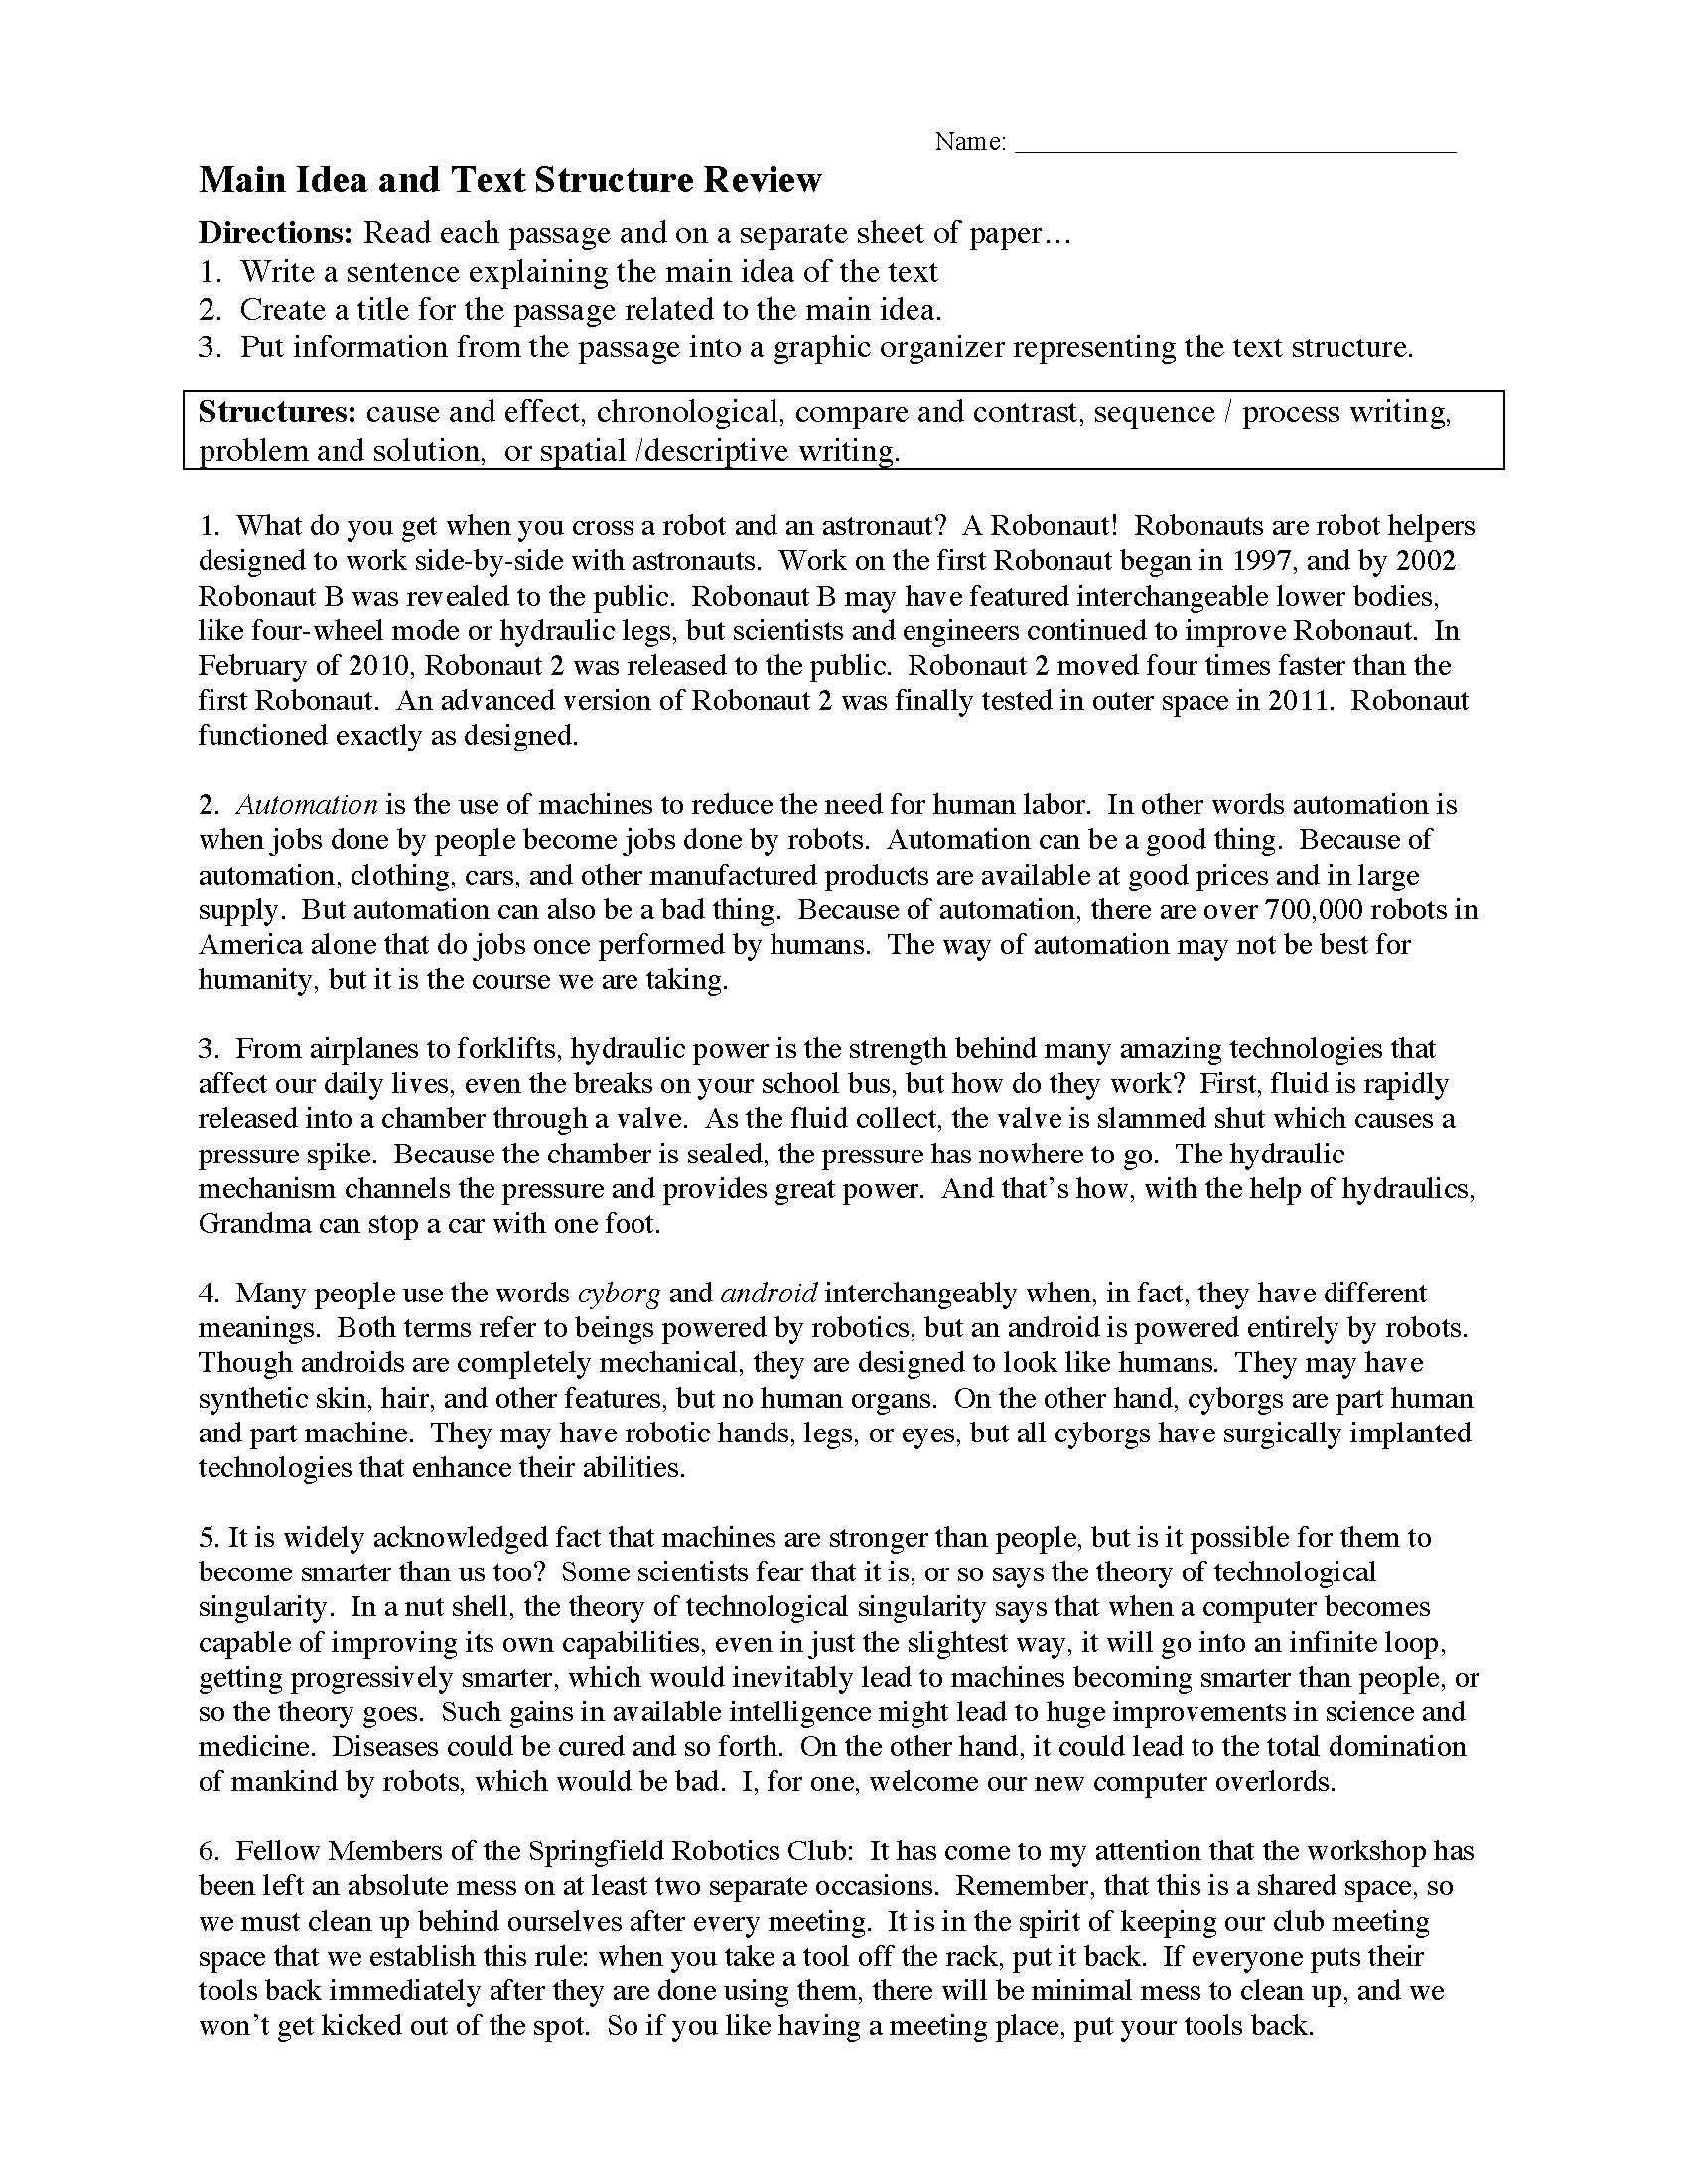 This is a preview image of Main Idea and Text Structure Worksheet 2. Click on it to enlarge it or view the source file.